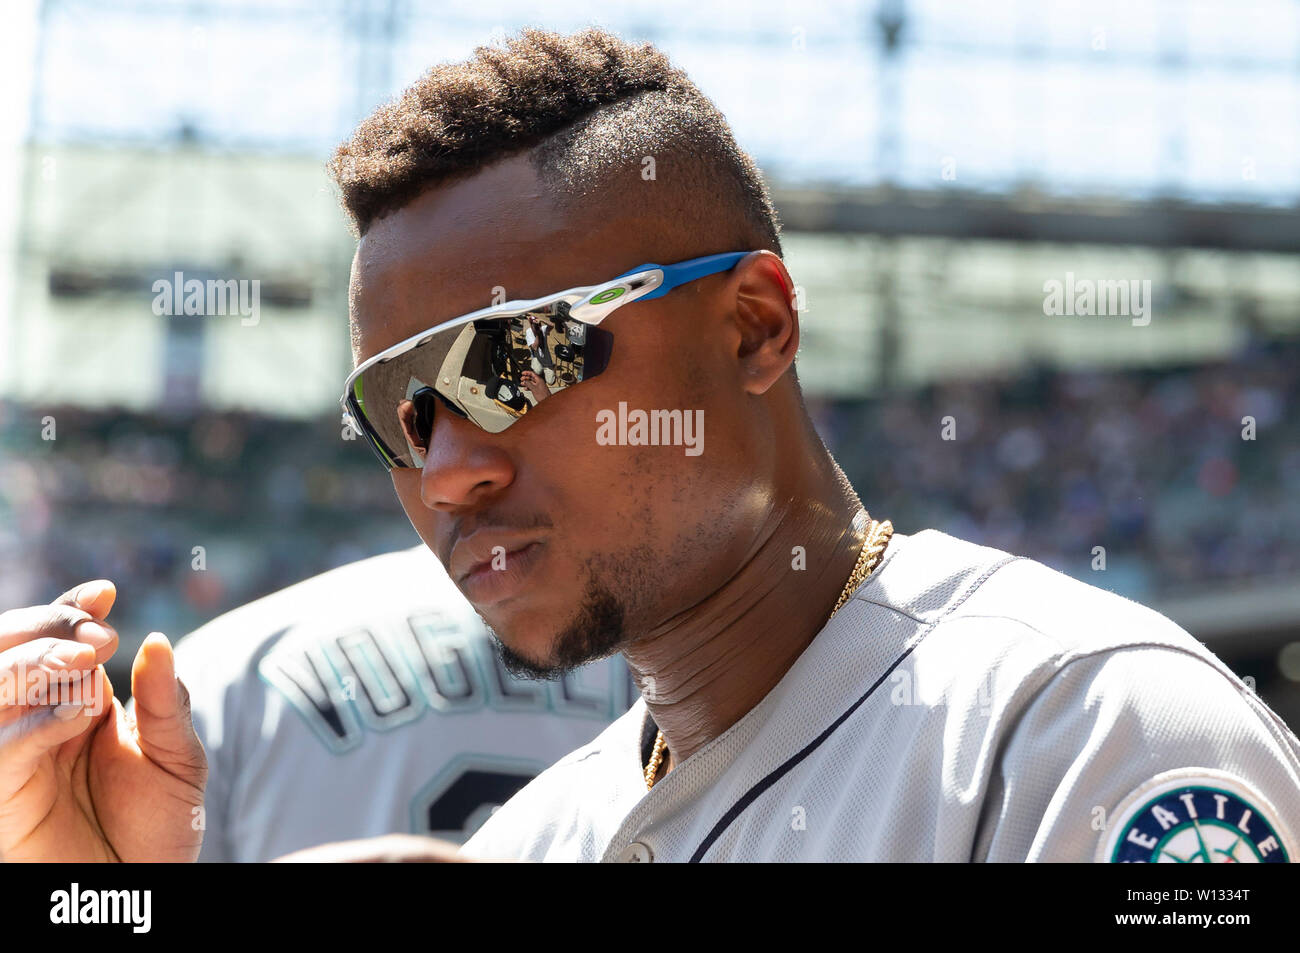 Milwaukee, WI, USA. 27th June, 2019. Seattle Mariners shortstop Tim Beckham  #1 wearing Oakley sunglasses during the Major League Baseball game between  the Milwaukee Brewers and the Seattle Mariners at Miller Park